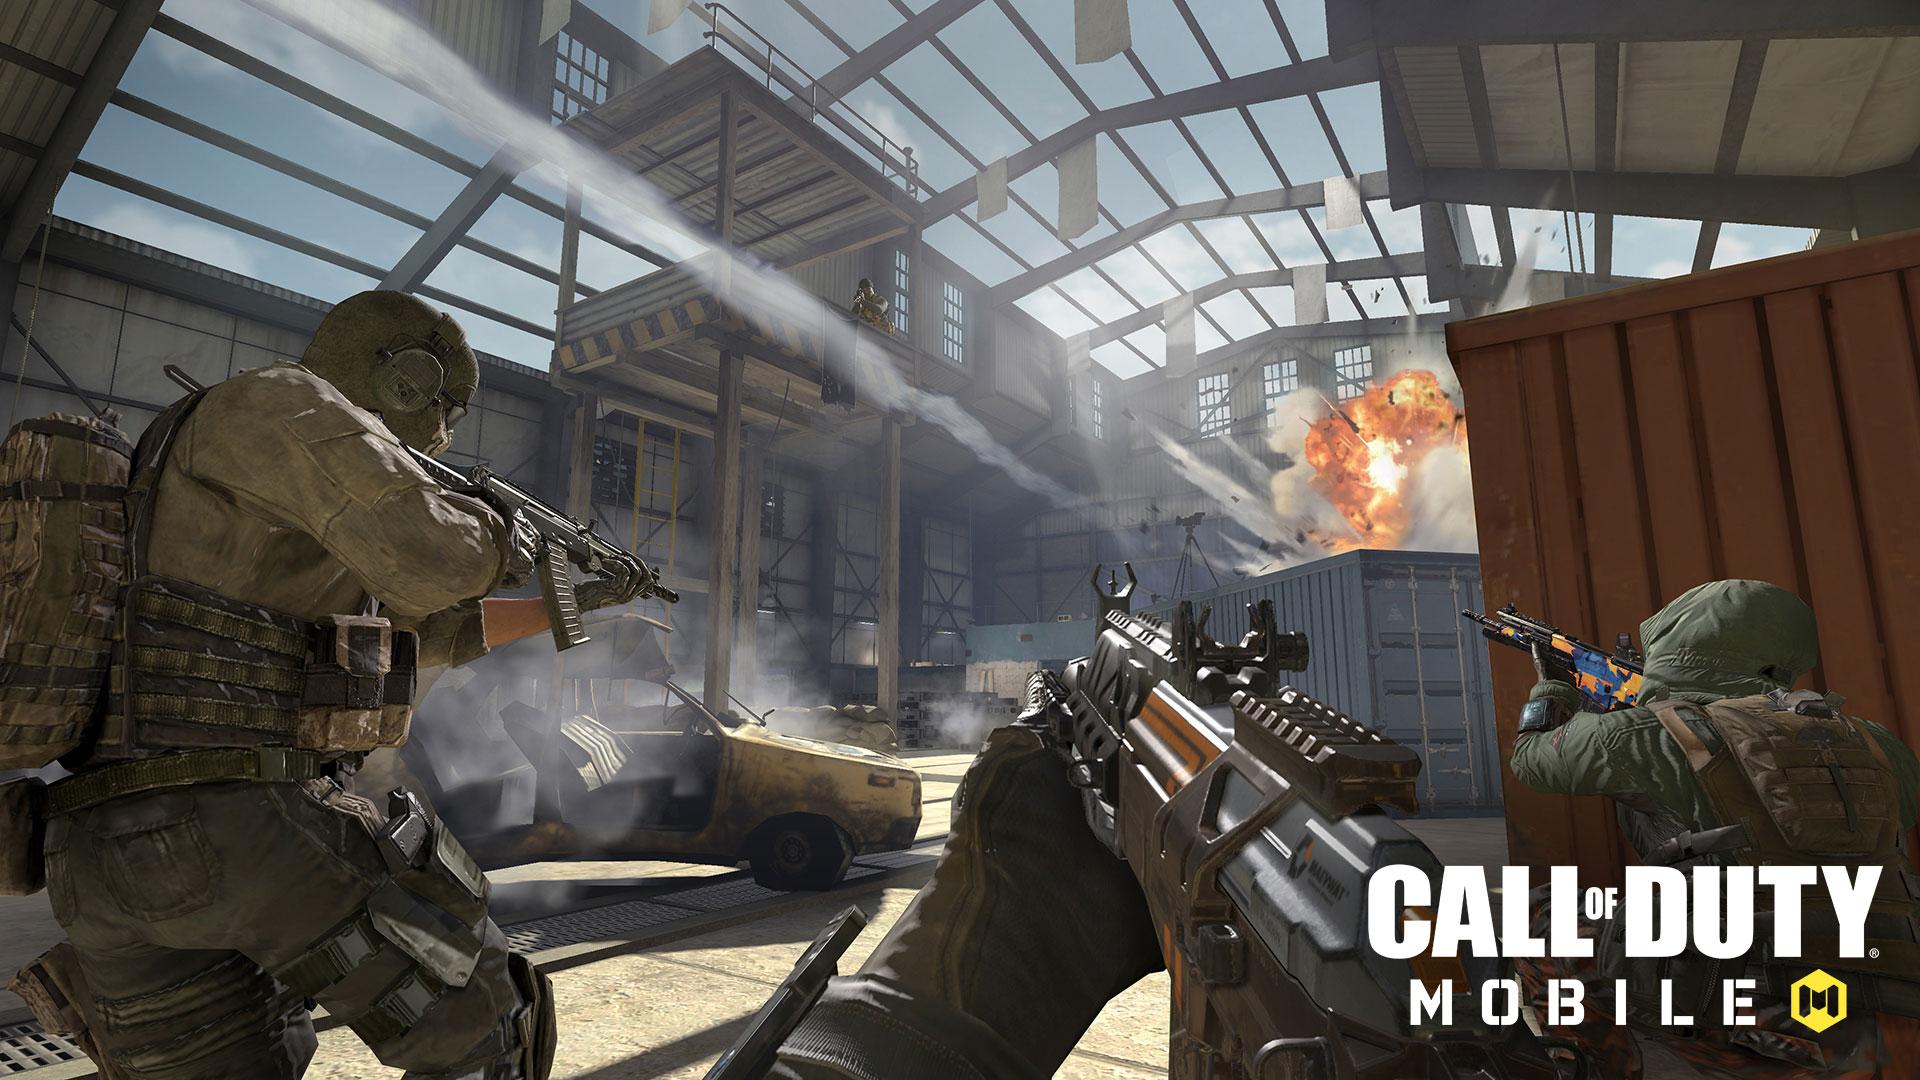 Call of Duty Mobile guide: loadouts, maps, modes, characters